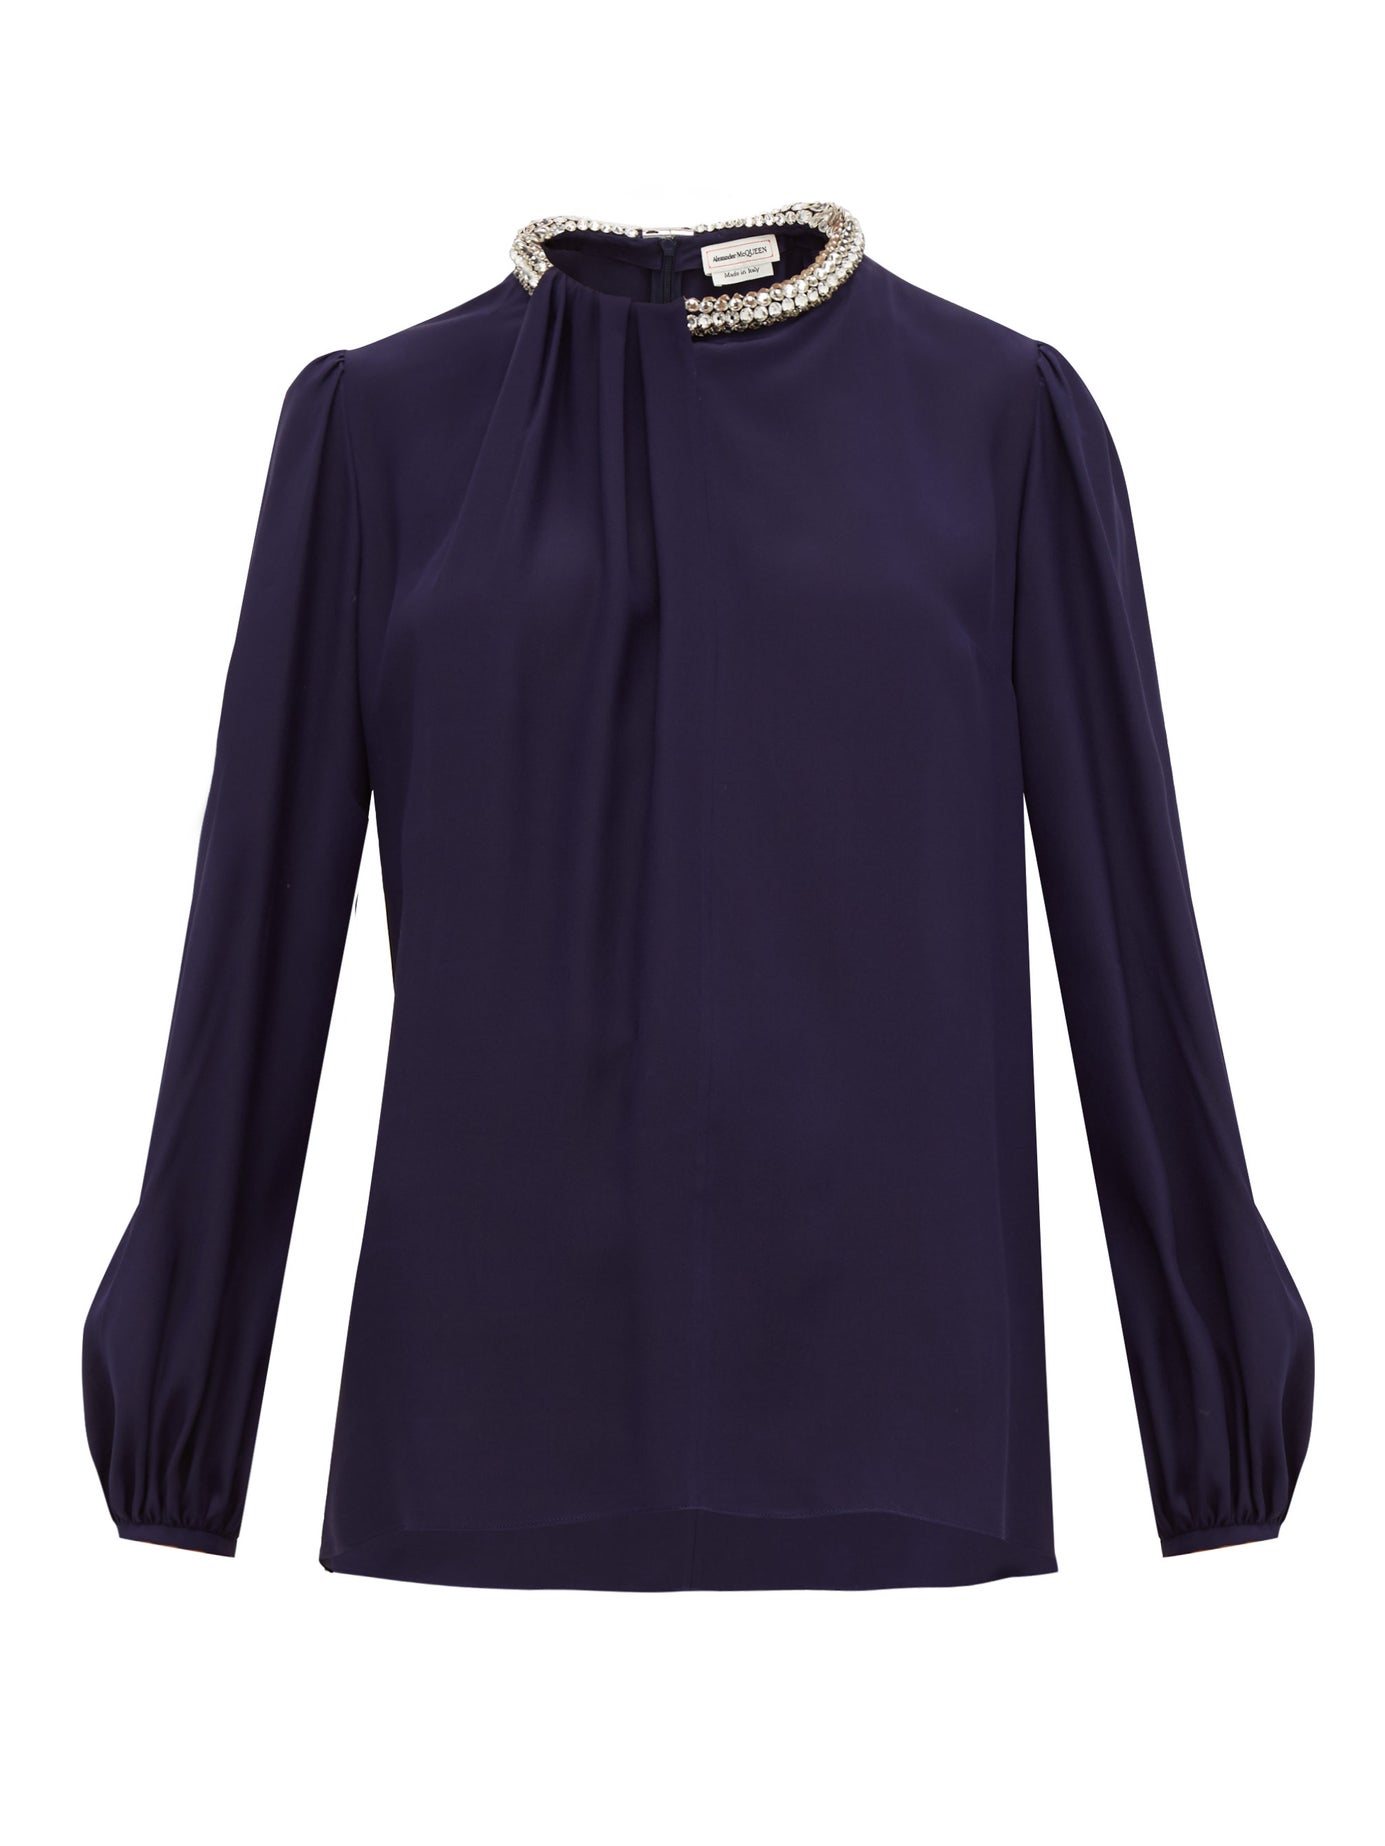 Alexander Mcqueen - Crystal-Embellished Silk Blouse | ABOUT ICONS